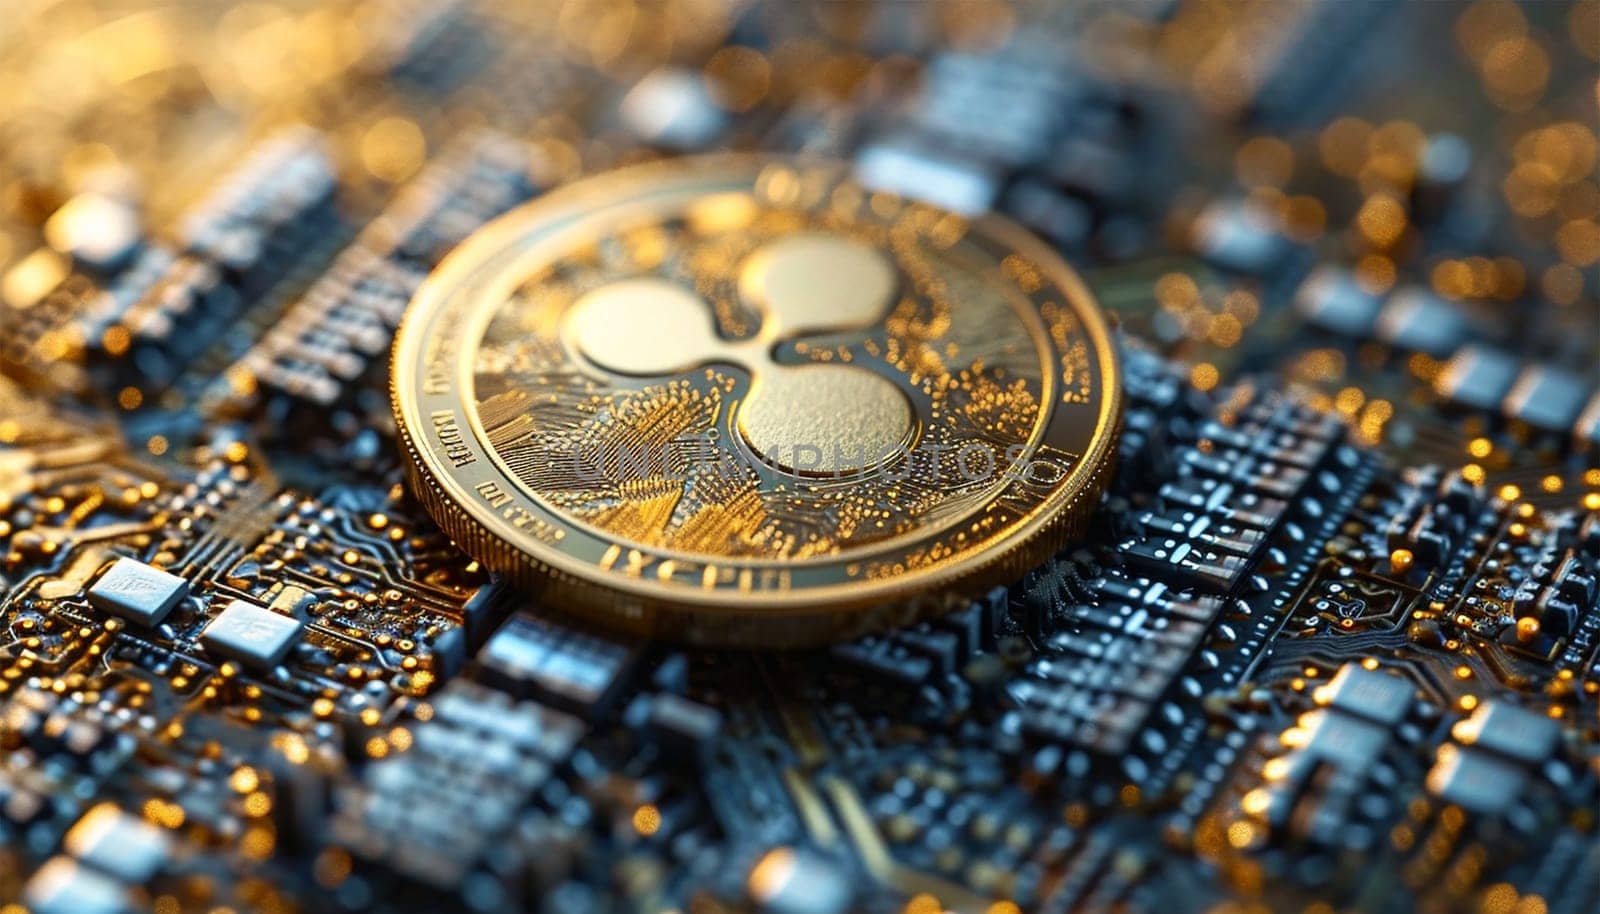 the ripple-xrp virtual currency logo. 3d illustrations. Bitcoin and cryptocurrency investing concept. Cryptocurrency golden coin with gold ripple symbol. Rise and fall charts of alt coins. Technology